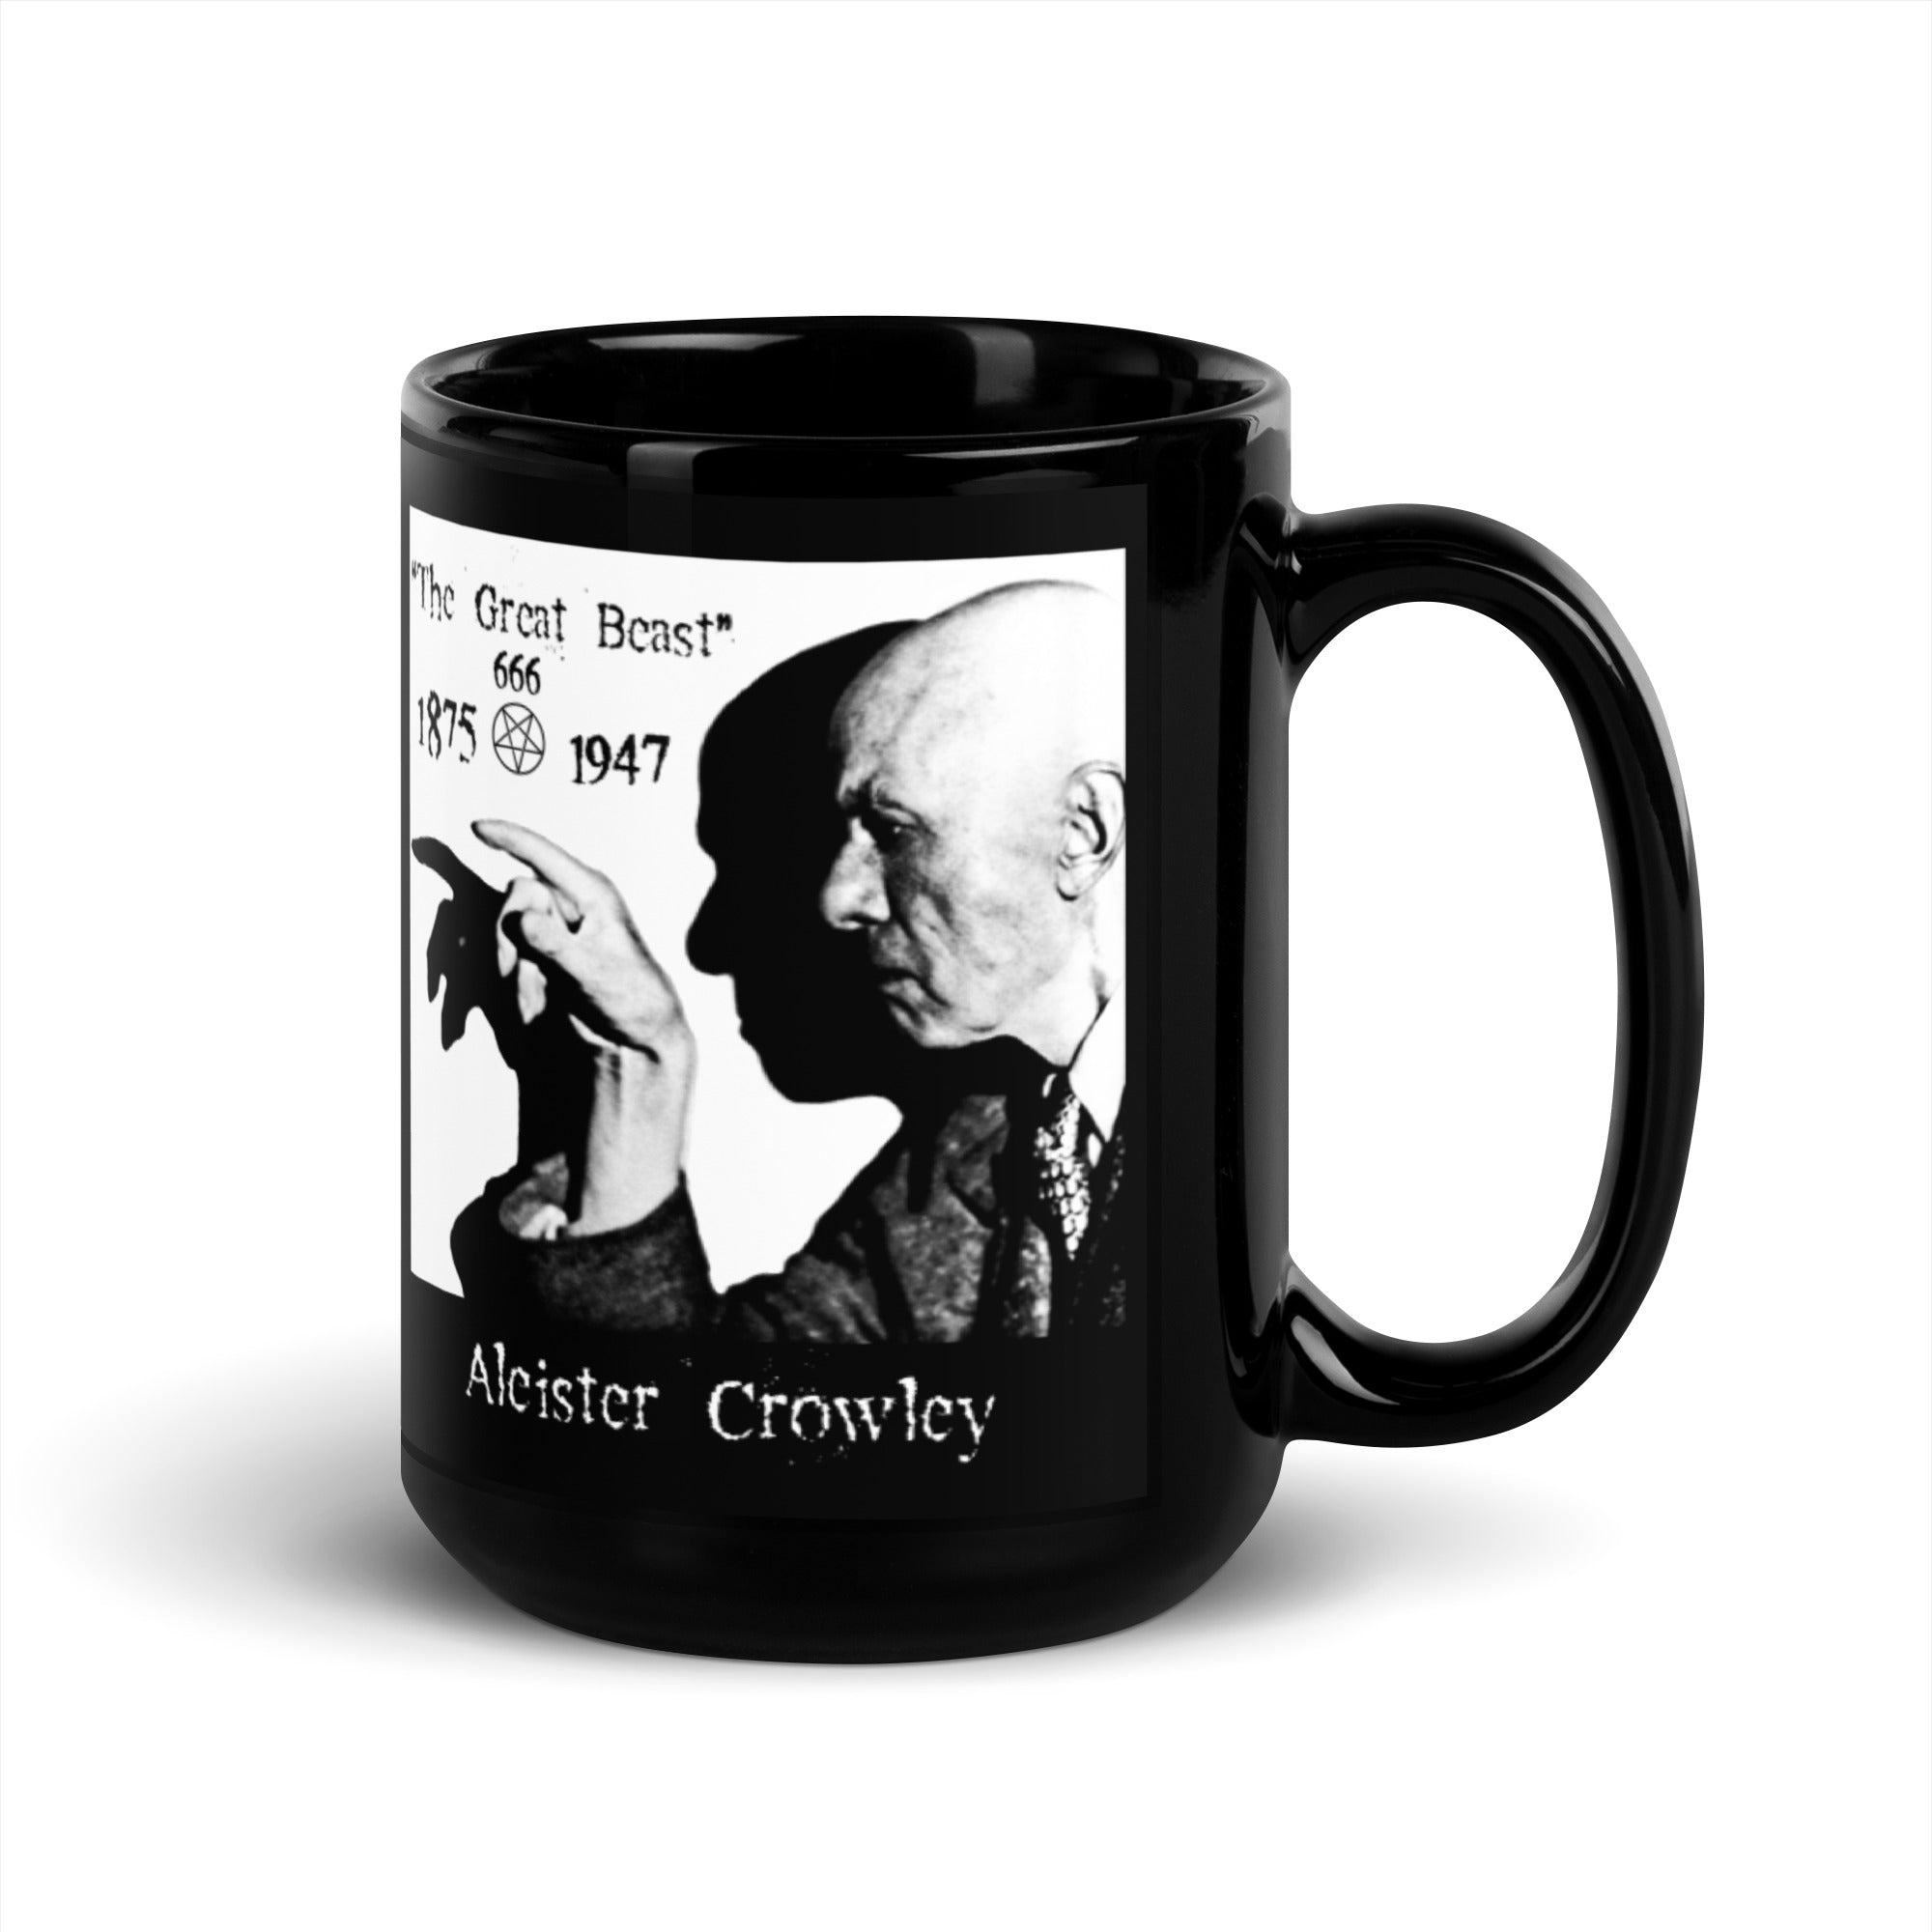 Aleister Crowley Infamous Occult Leader of Thelema Sex Magic on Black Glossy Mug - Edge of Life Designs